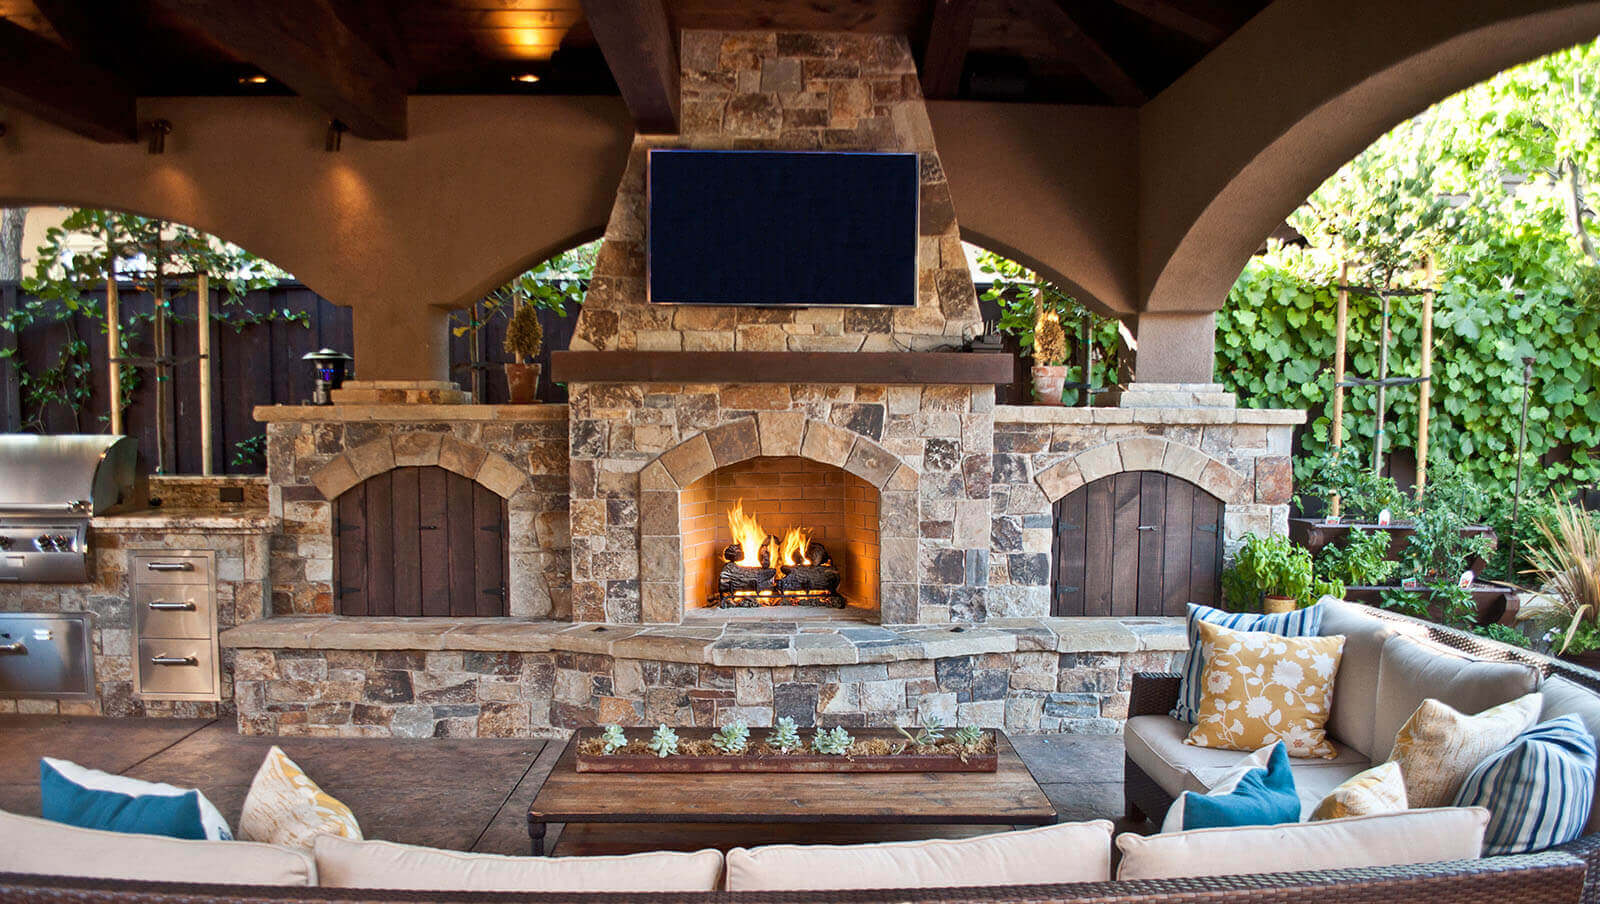 Covered patio with stone tile fireplace and storage area with lounge area and TV